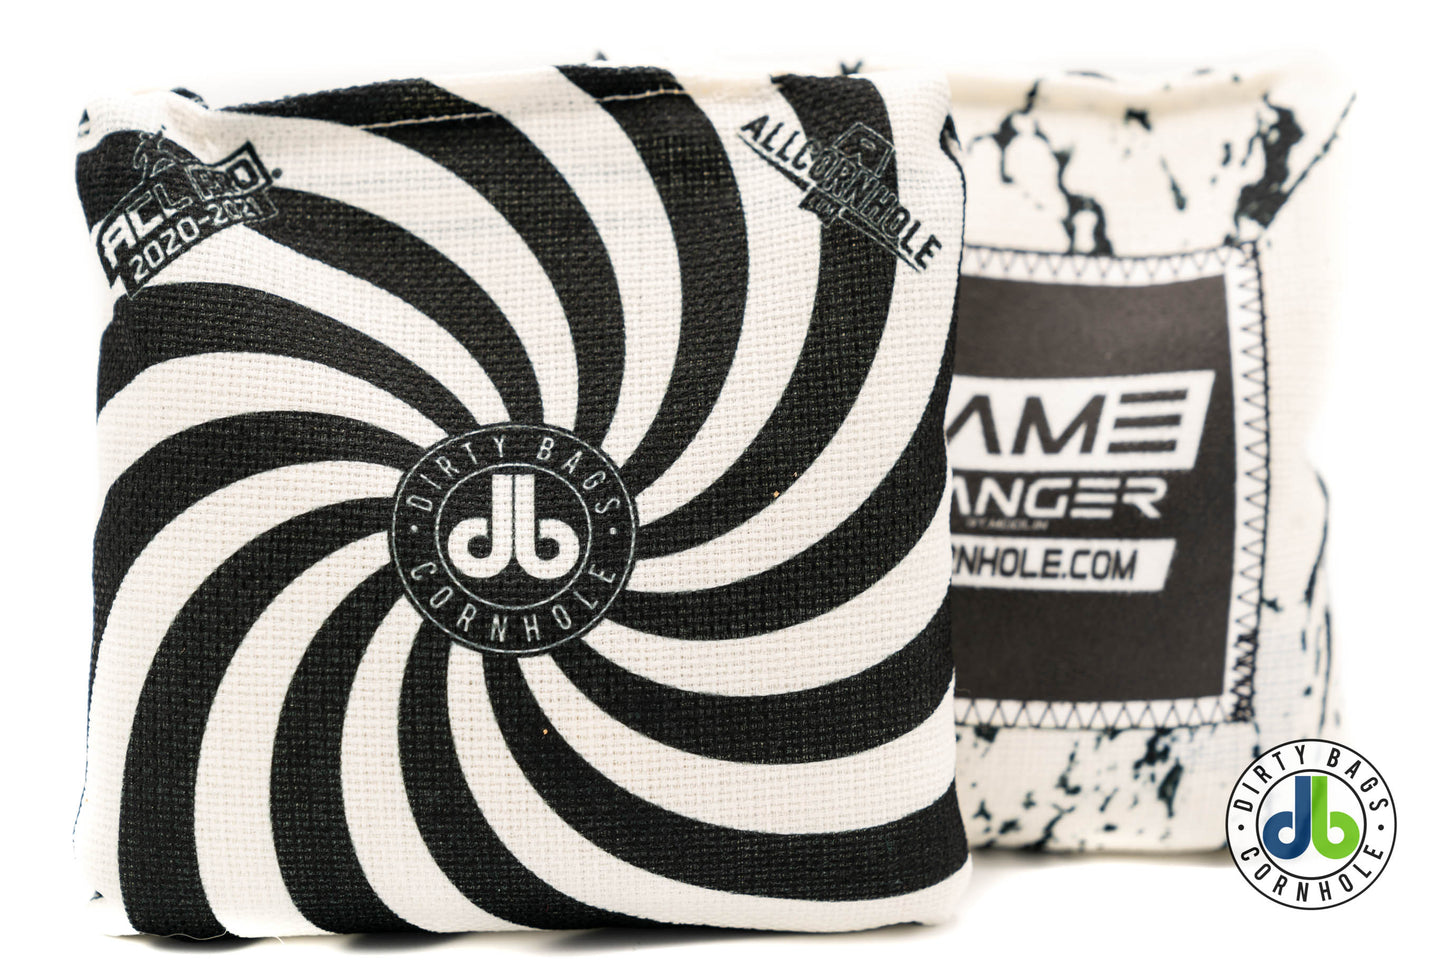 Game Changer Cornhole Bags - db Spinners (Set of 4)